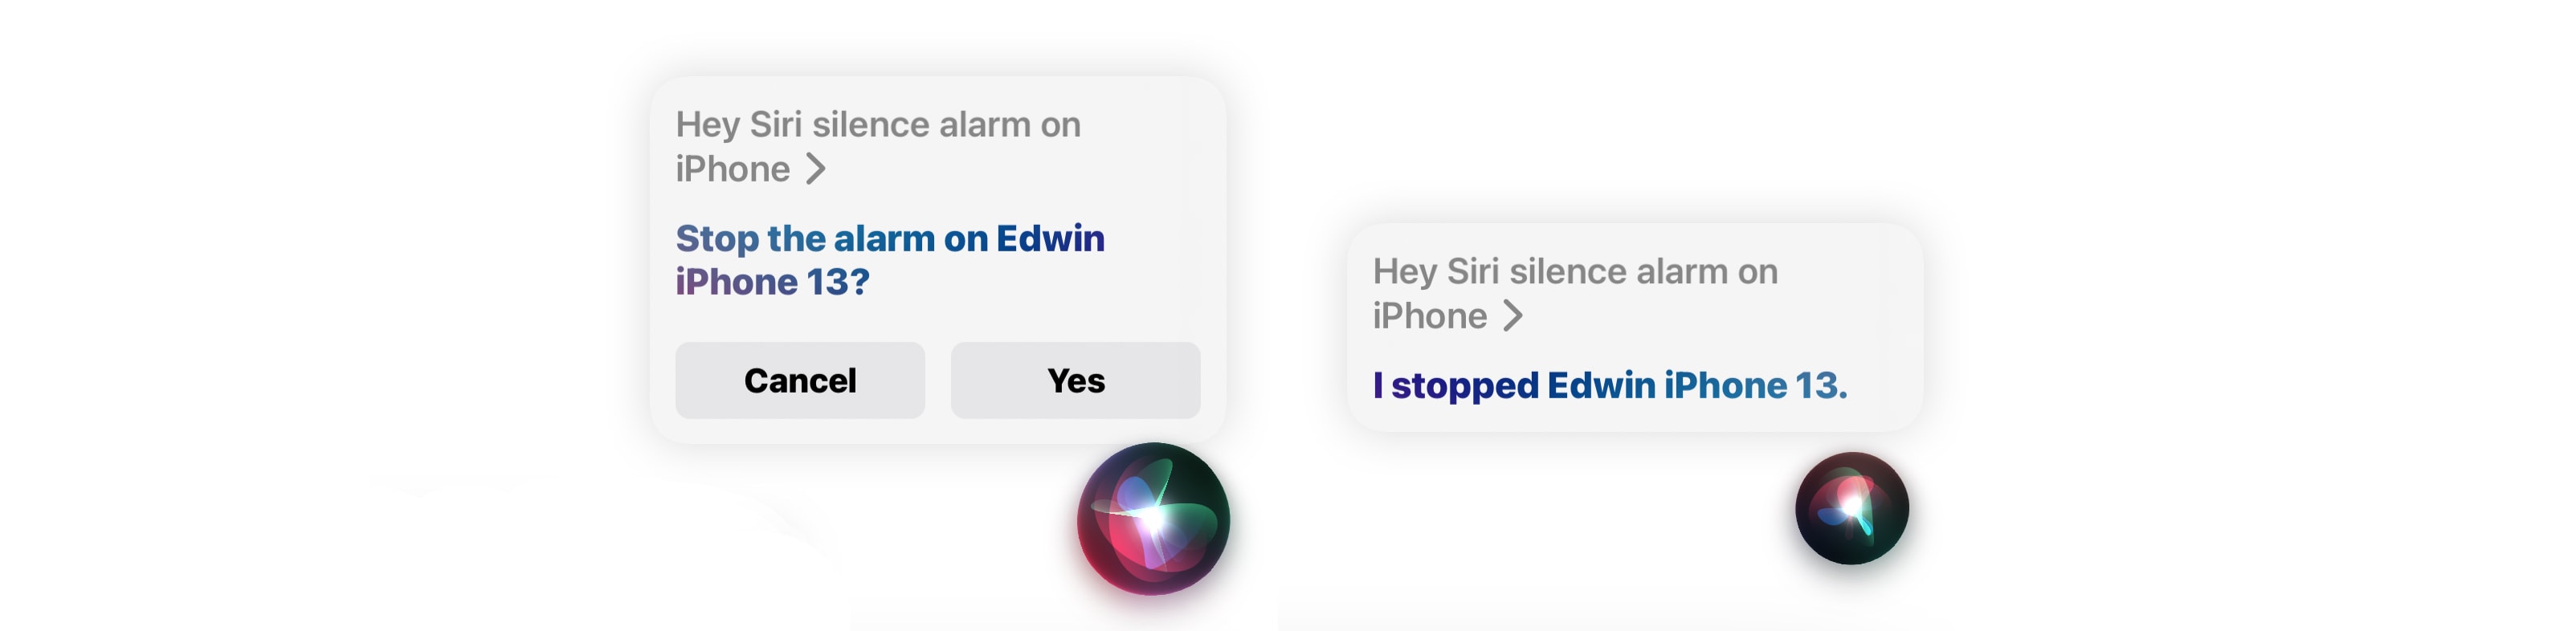 How to make Siri shut off alarms on your other Apple devices